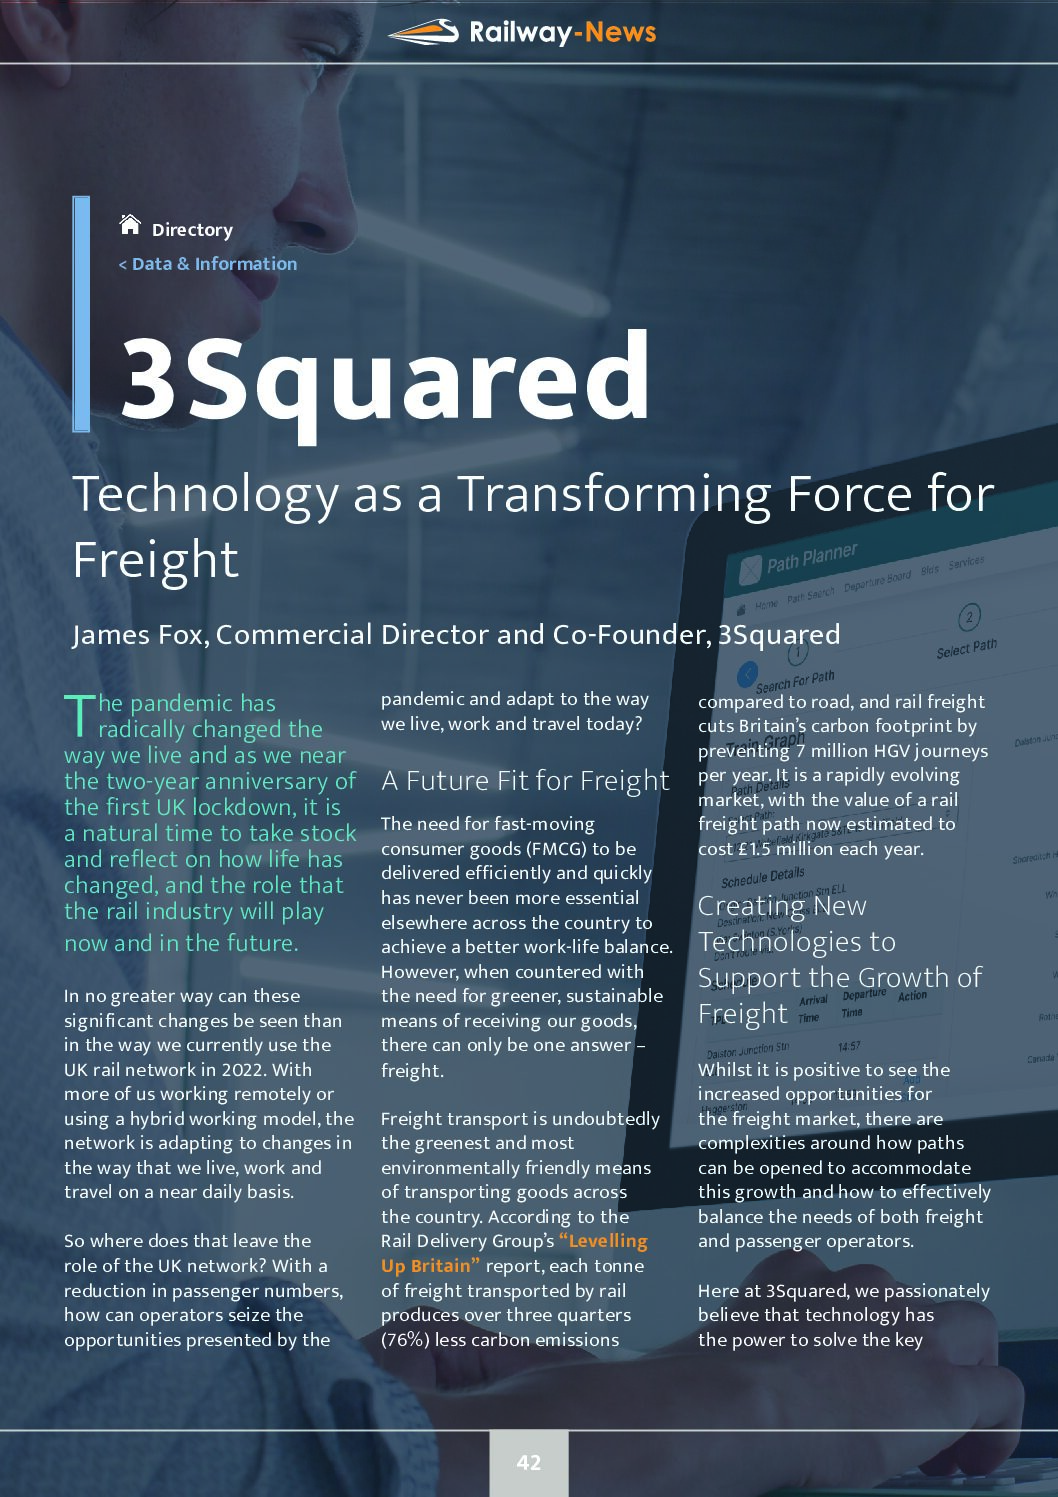 Technology as a Transforming Force for Freight